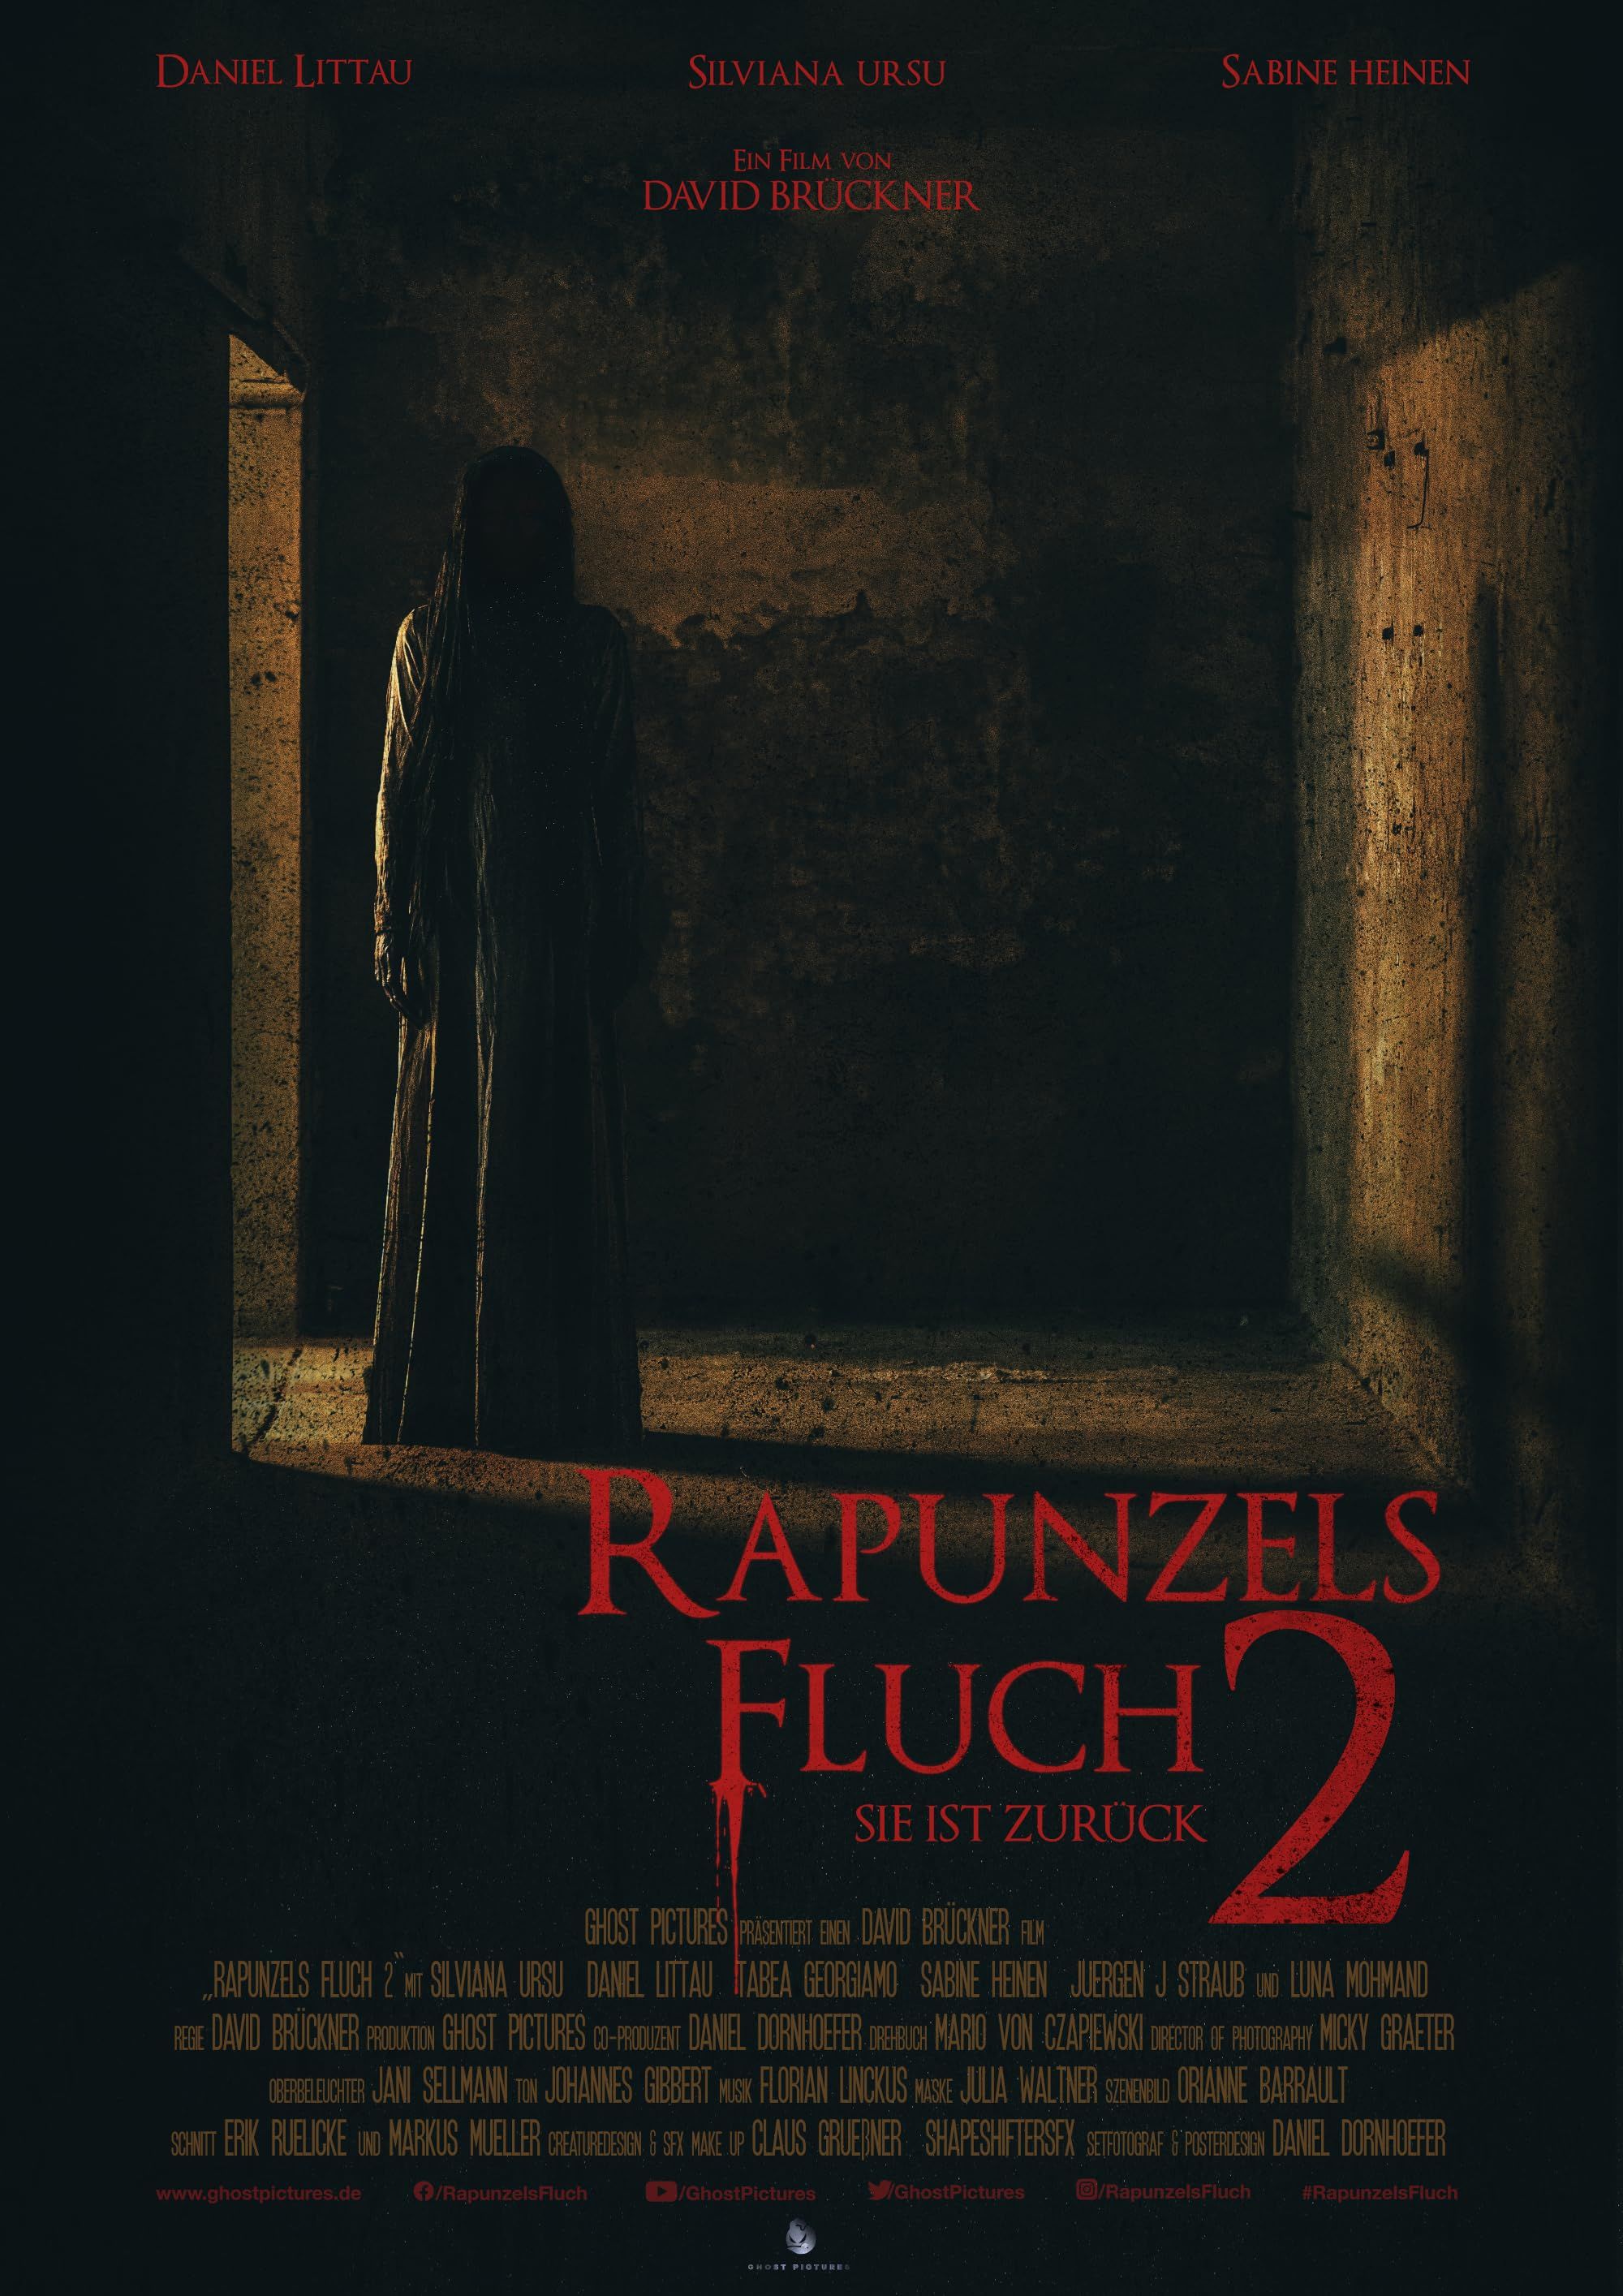 Rapunzels Fluch 2 2023 (Voice Over) Dubbed BluRay Full Movie 720p 480p